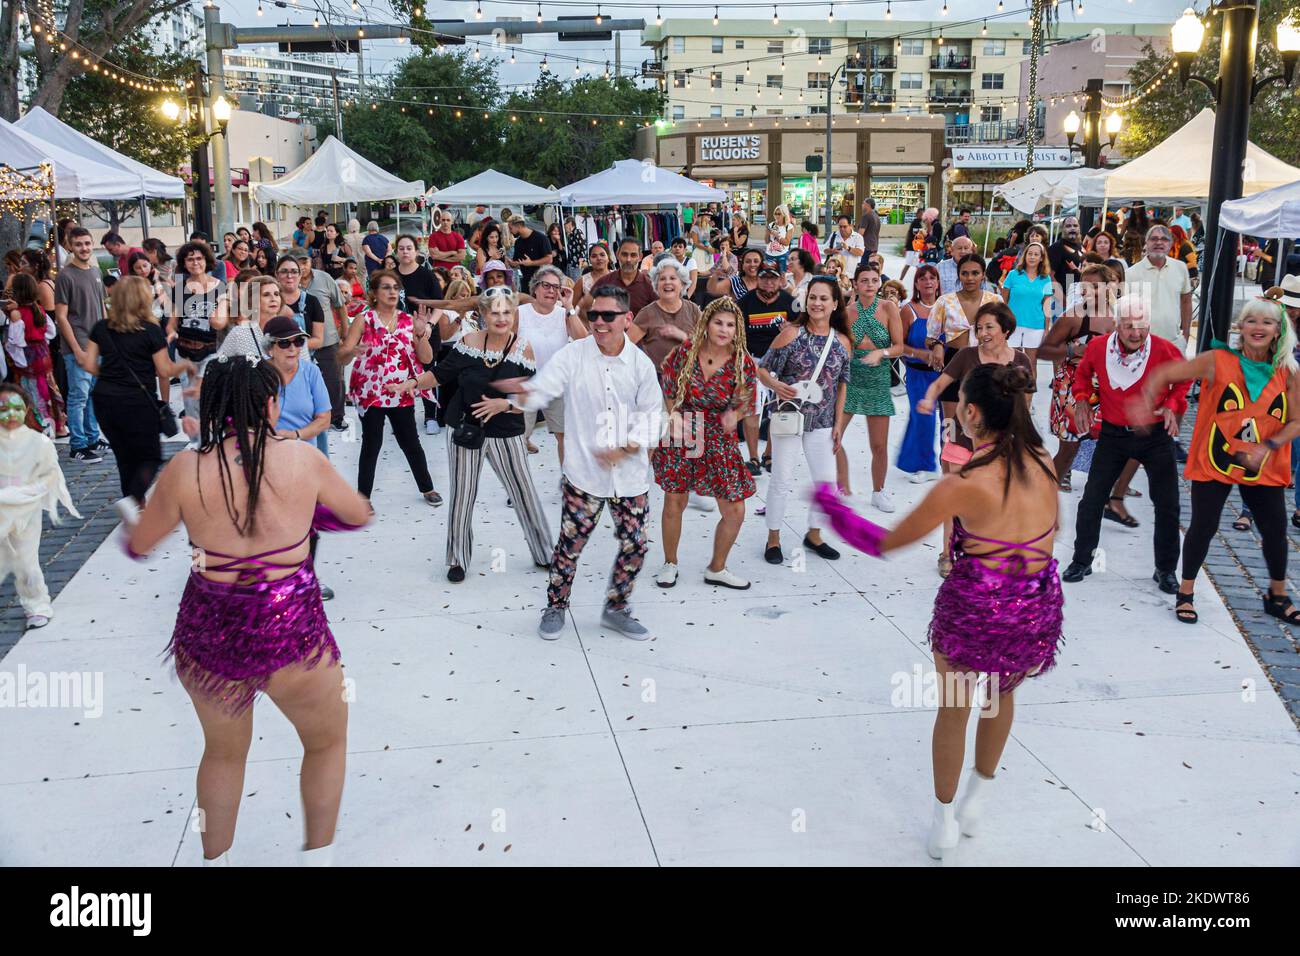 Miami Beach Florida,Normandy Isle Day of the Dead Salsa Party,Zumba line group dancing dancers fun,man men male woman women lady female adult adults,s Stock Photo